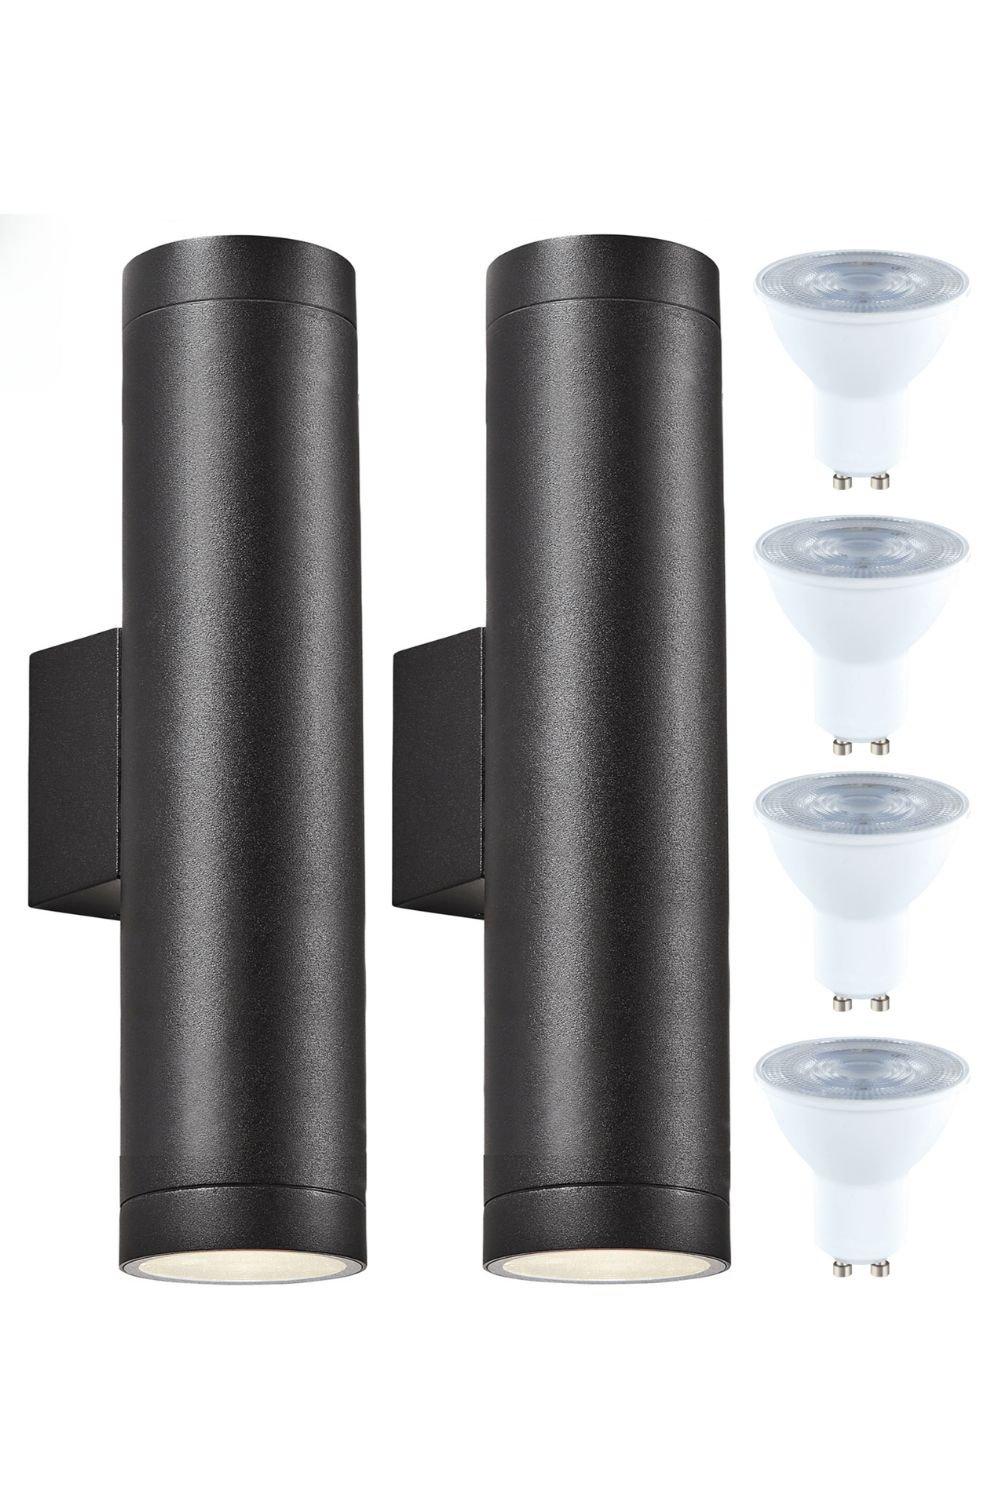 Long Up and Down Lights with LED GU10 Bulbs Included - Black - Twin Pack